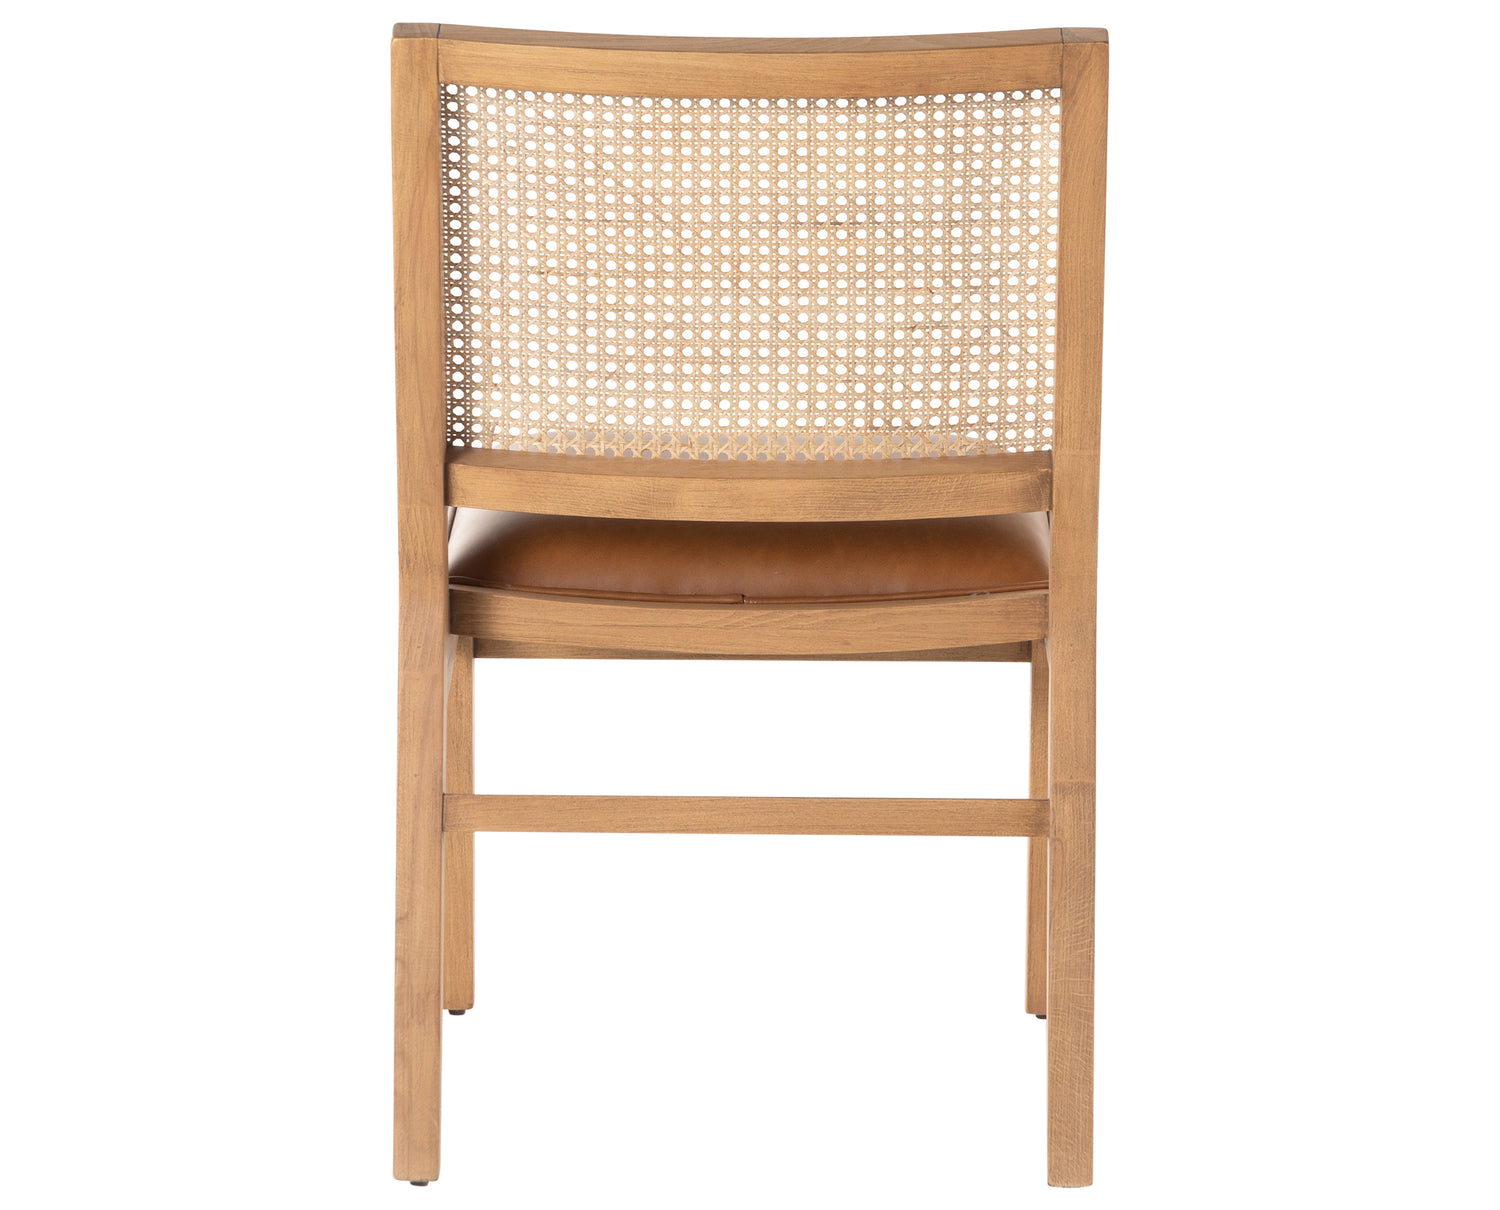 Sierra Butterscotch Faux Leather & Natural Beech with Natural Cane | Sage Dining Chair | Valley Ridge Furniture